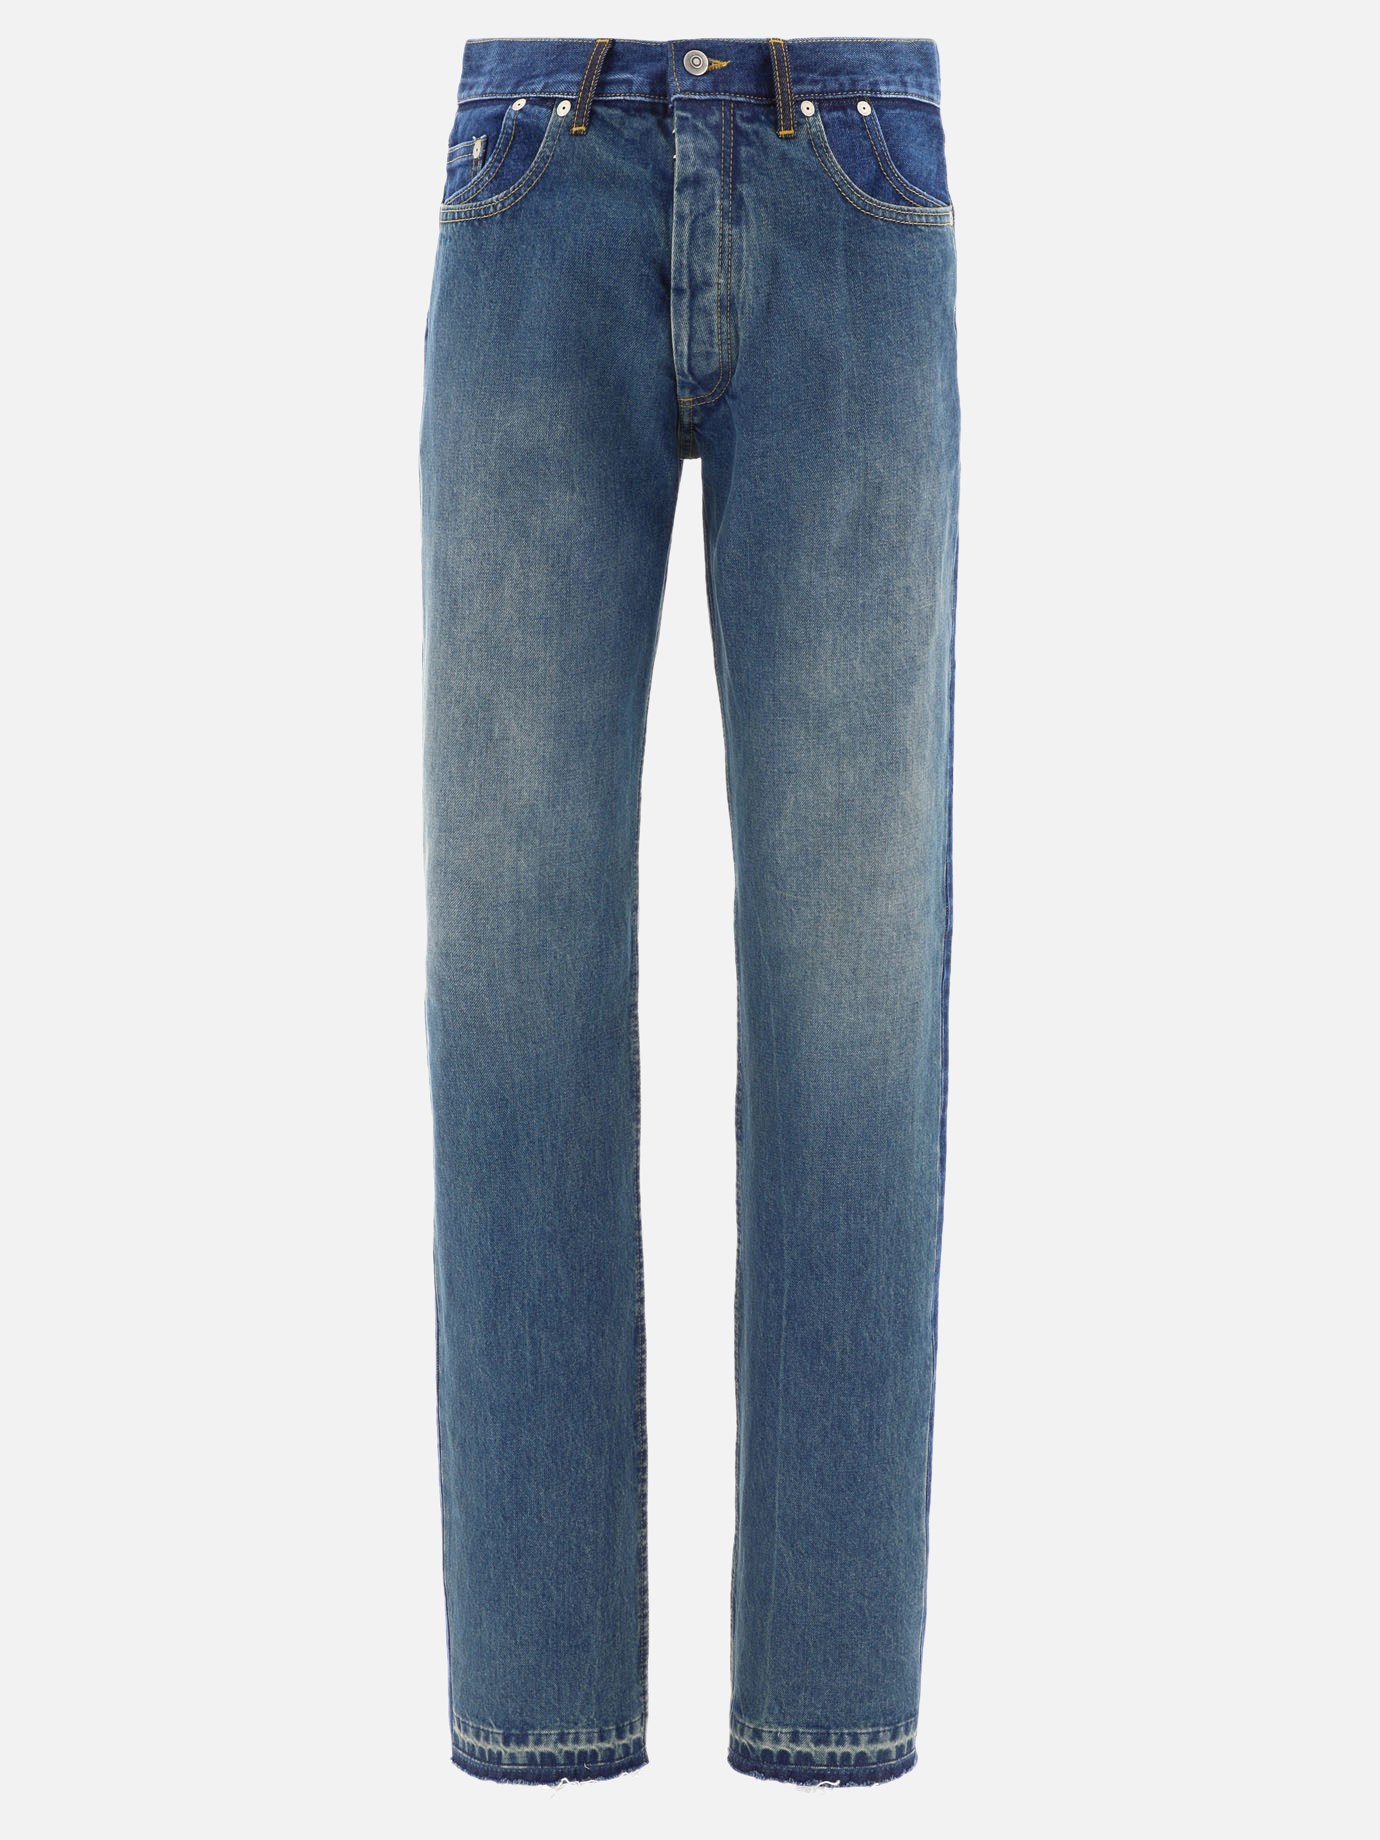 Washed out jeans by Maison Margiela - 0